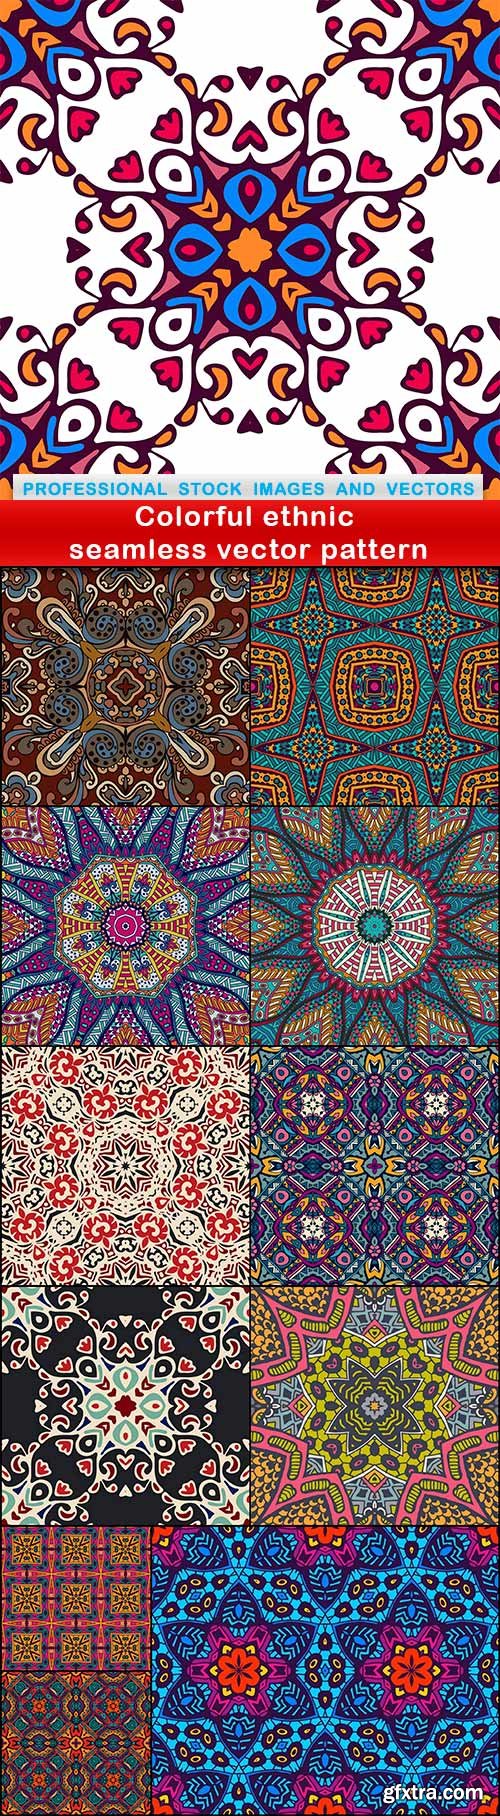 Colorful ethnic seamless vector pattern - 12 EPS